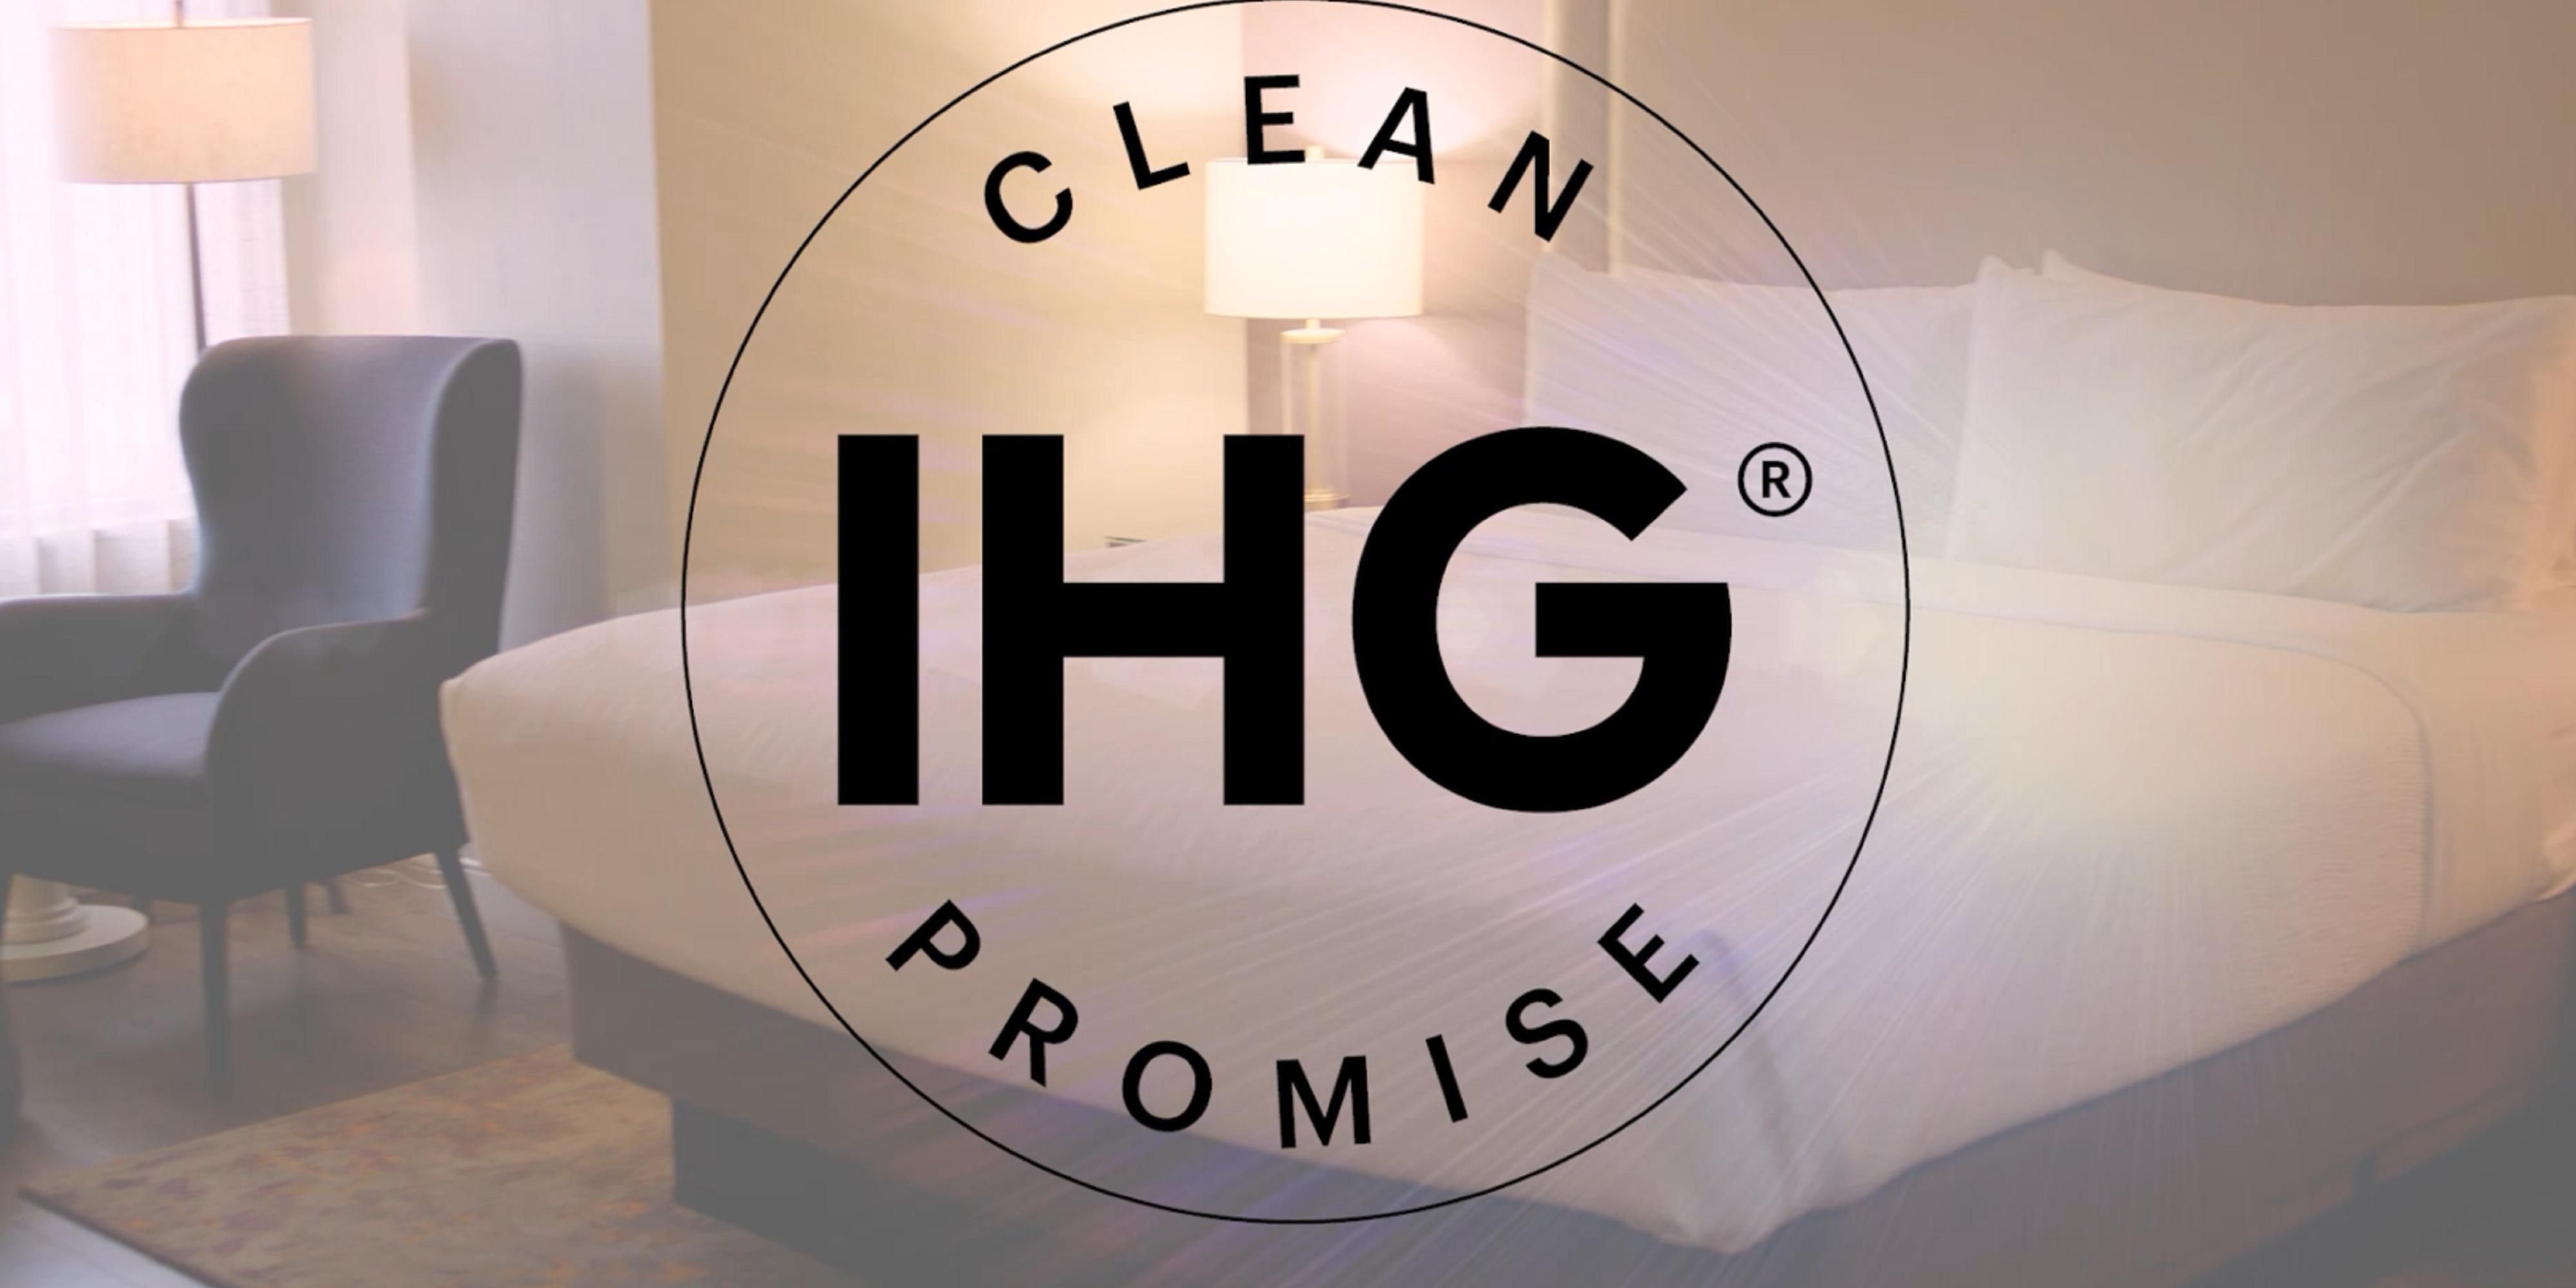 As the world adjusts to new travel norms and expectations, we’re enhancing the experience for you – our hotel guests – by redefining cleanliness and supporting well-being throughout your stay.